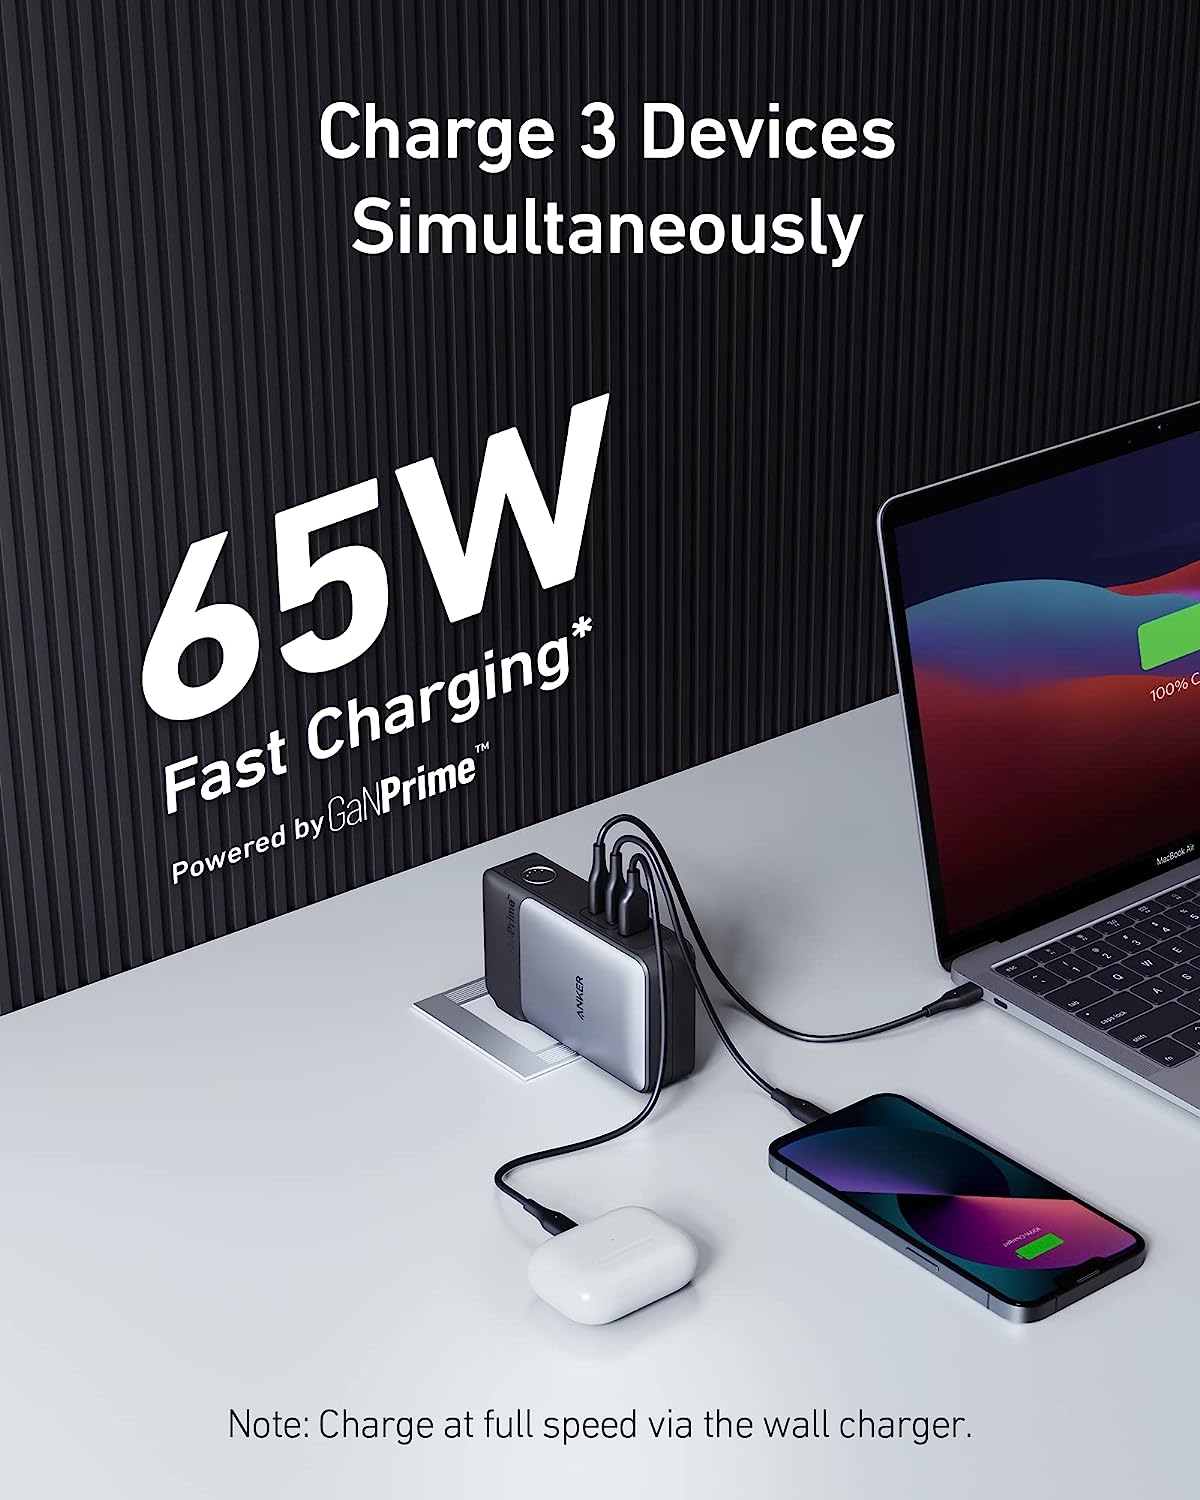 Anker Power Bank (GaNPrime PowerCore 65W), 2-in-1 Hybrid Charger, 10,000mAh 30W USB-C Portable Charger with 65W Wall Charger